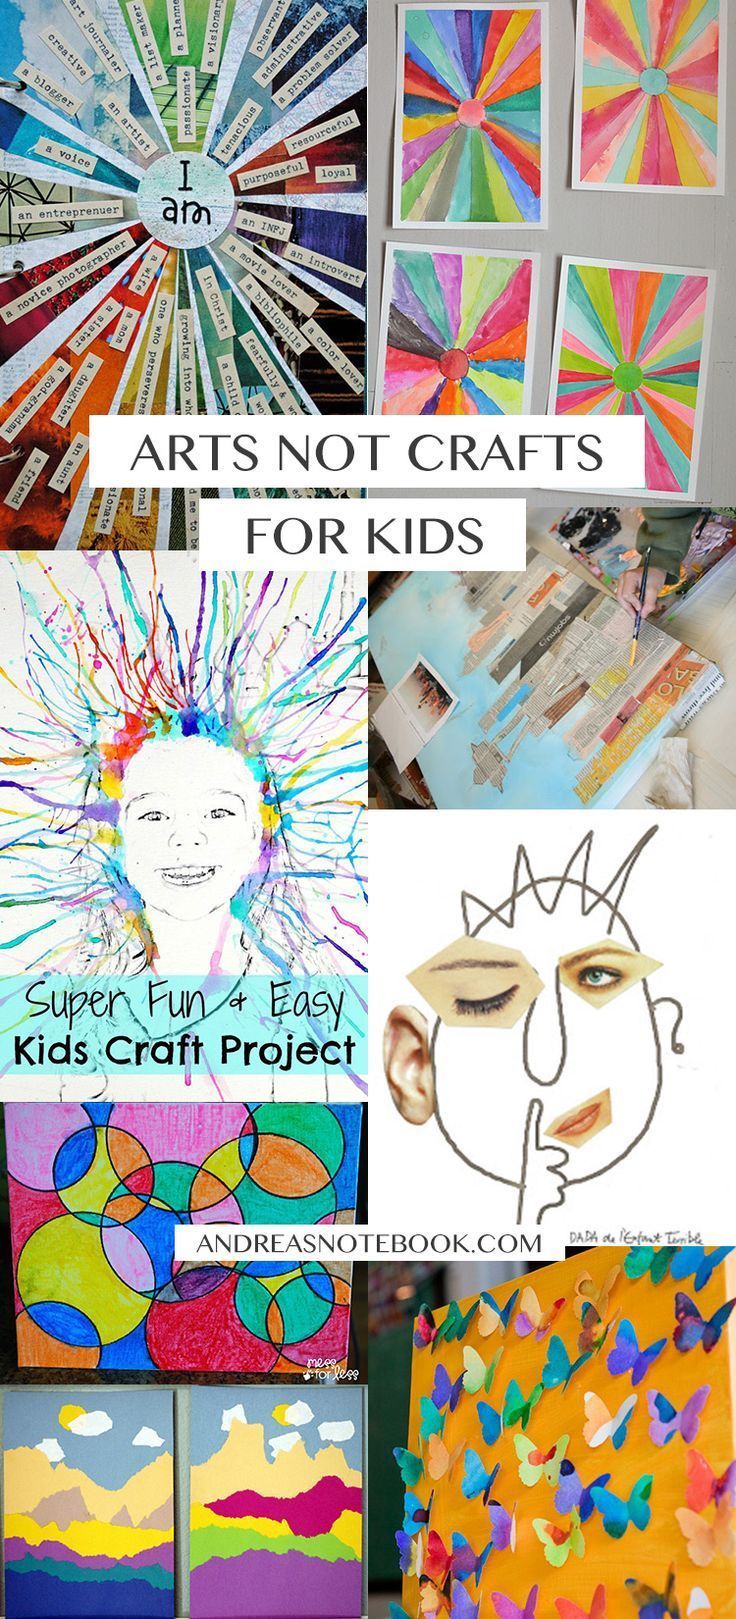 Tired of kid crafts? Introduce them to the arts! Check out this inspiration!